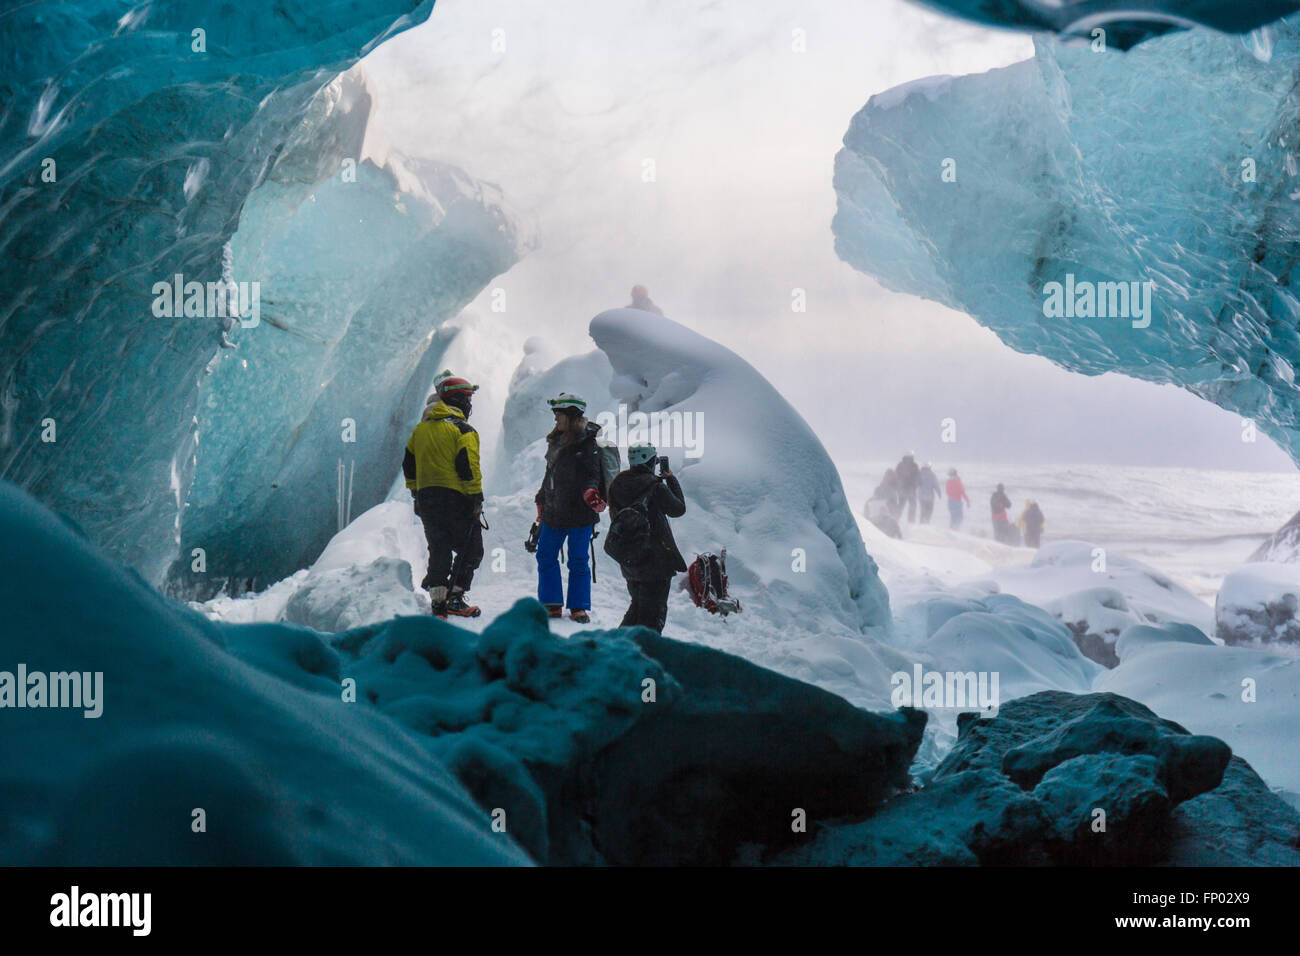 People at the entrance of an ice cave, Vatnajökull Nationalpark, Glacier, Iceland Stock Photo